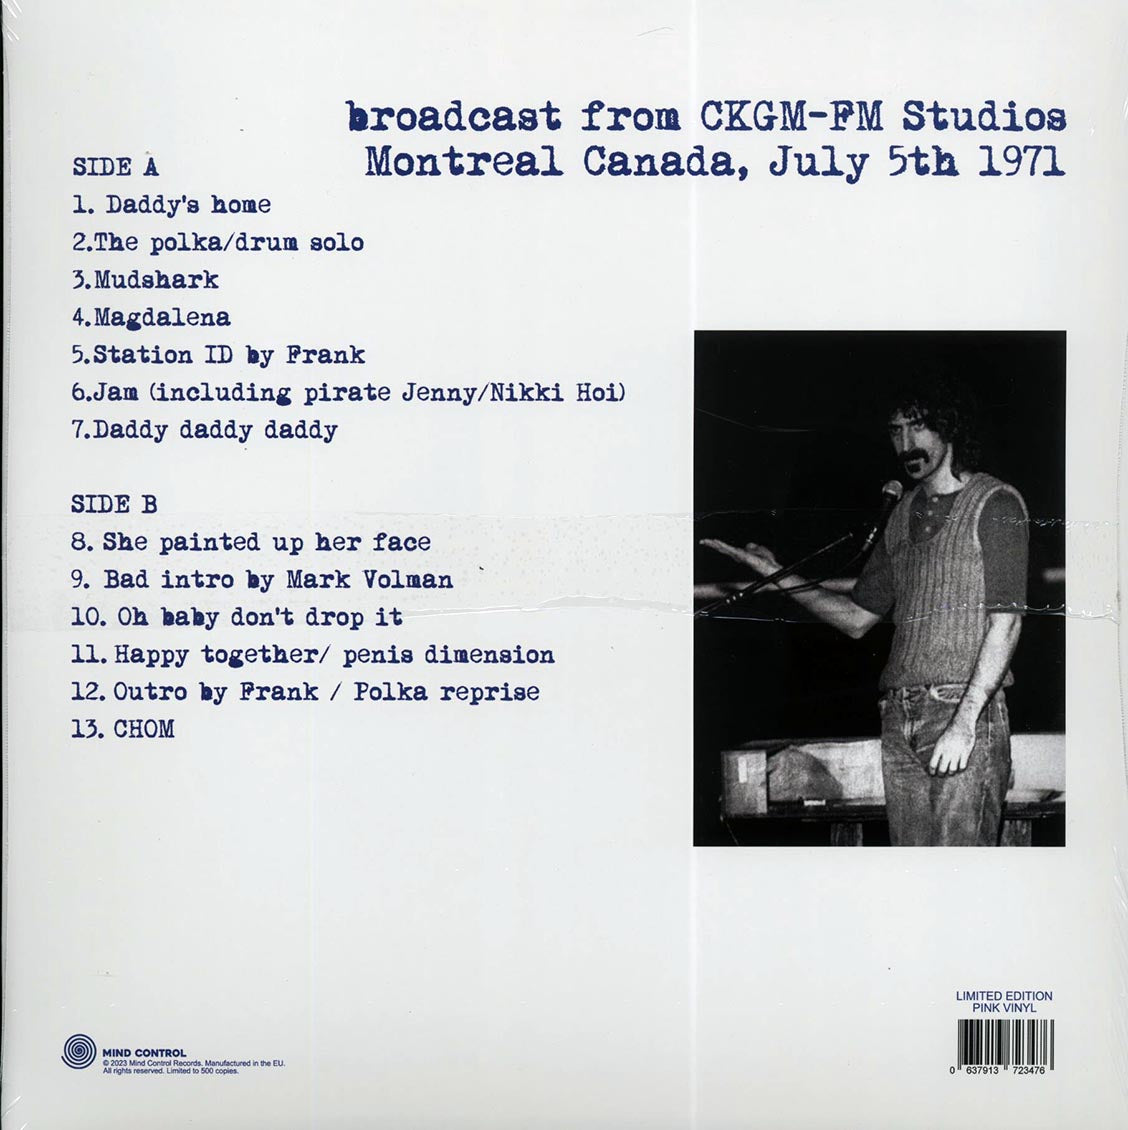 Frank Zappa - Live Montreal 1971: Broadcast From CKGM-FM Studios, Montreal Canada, July 5th 1971